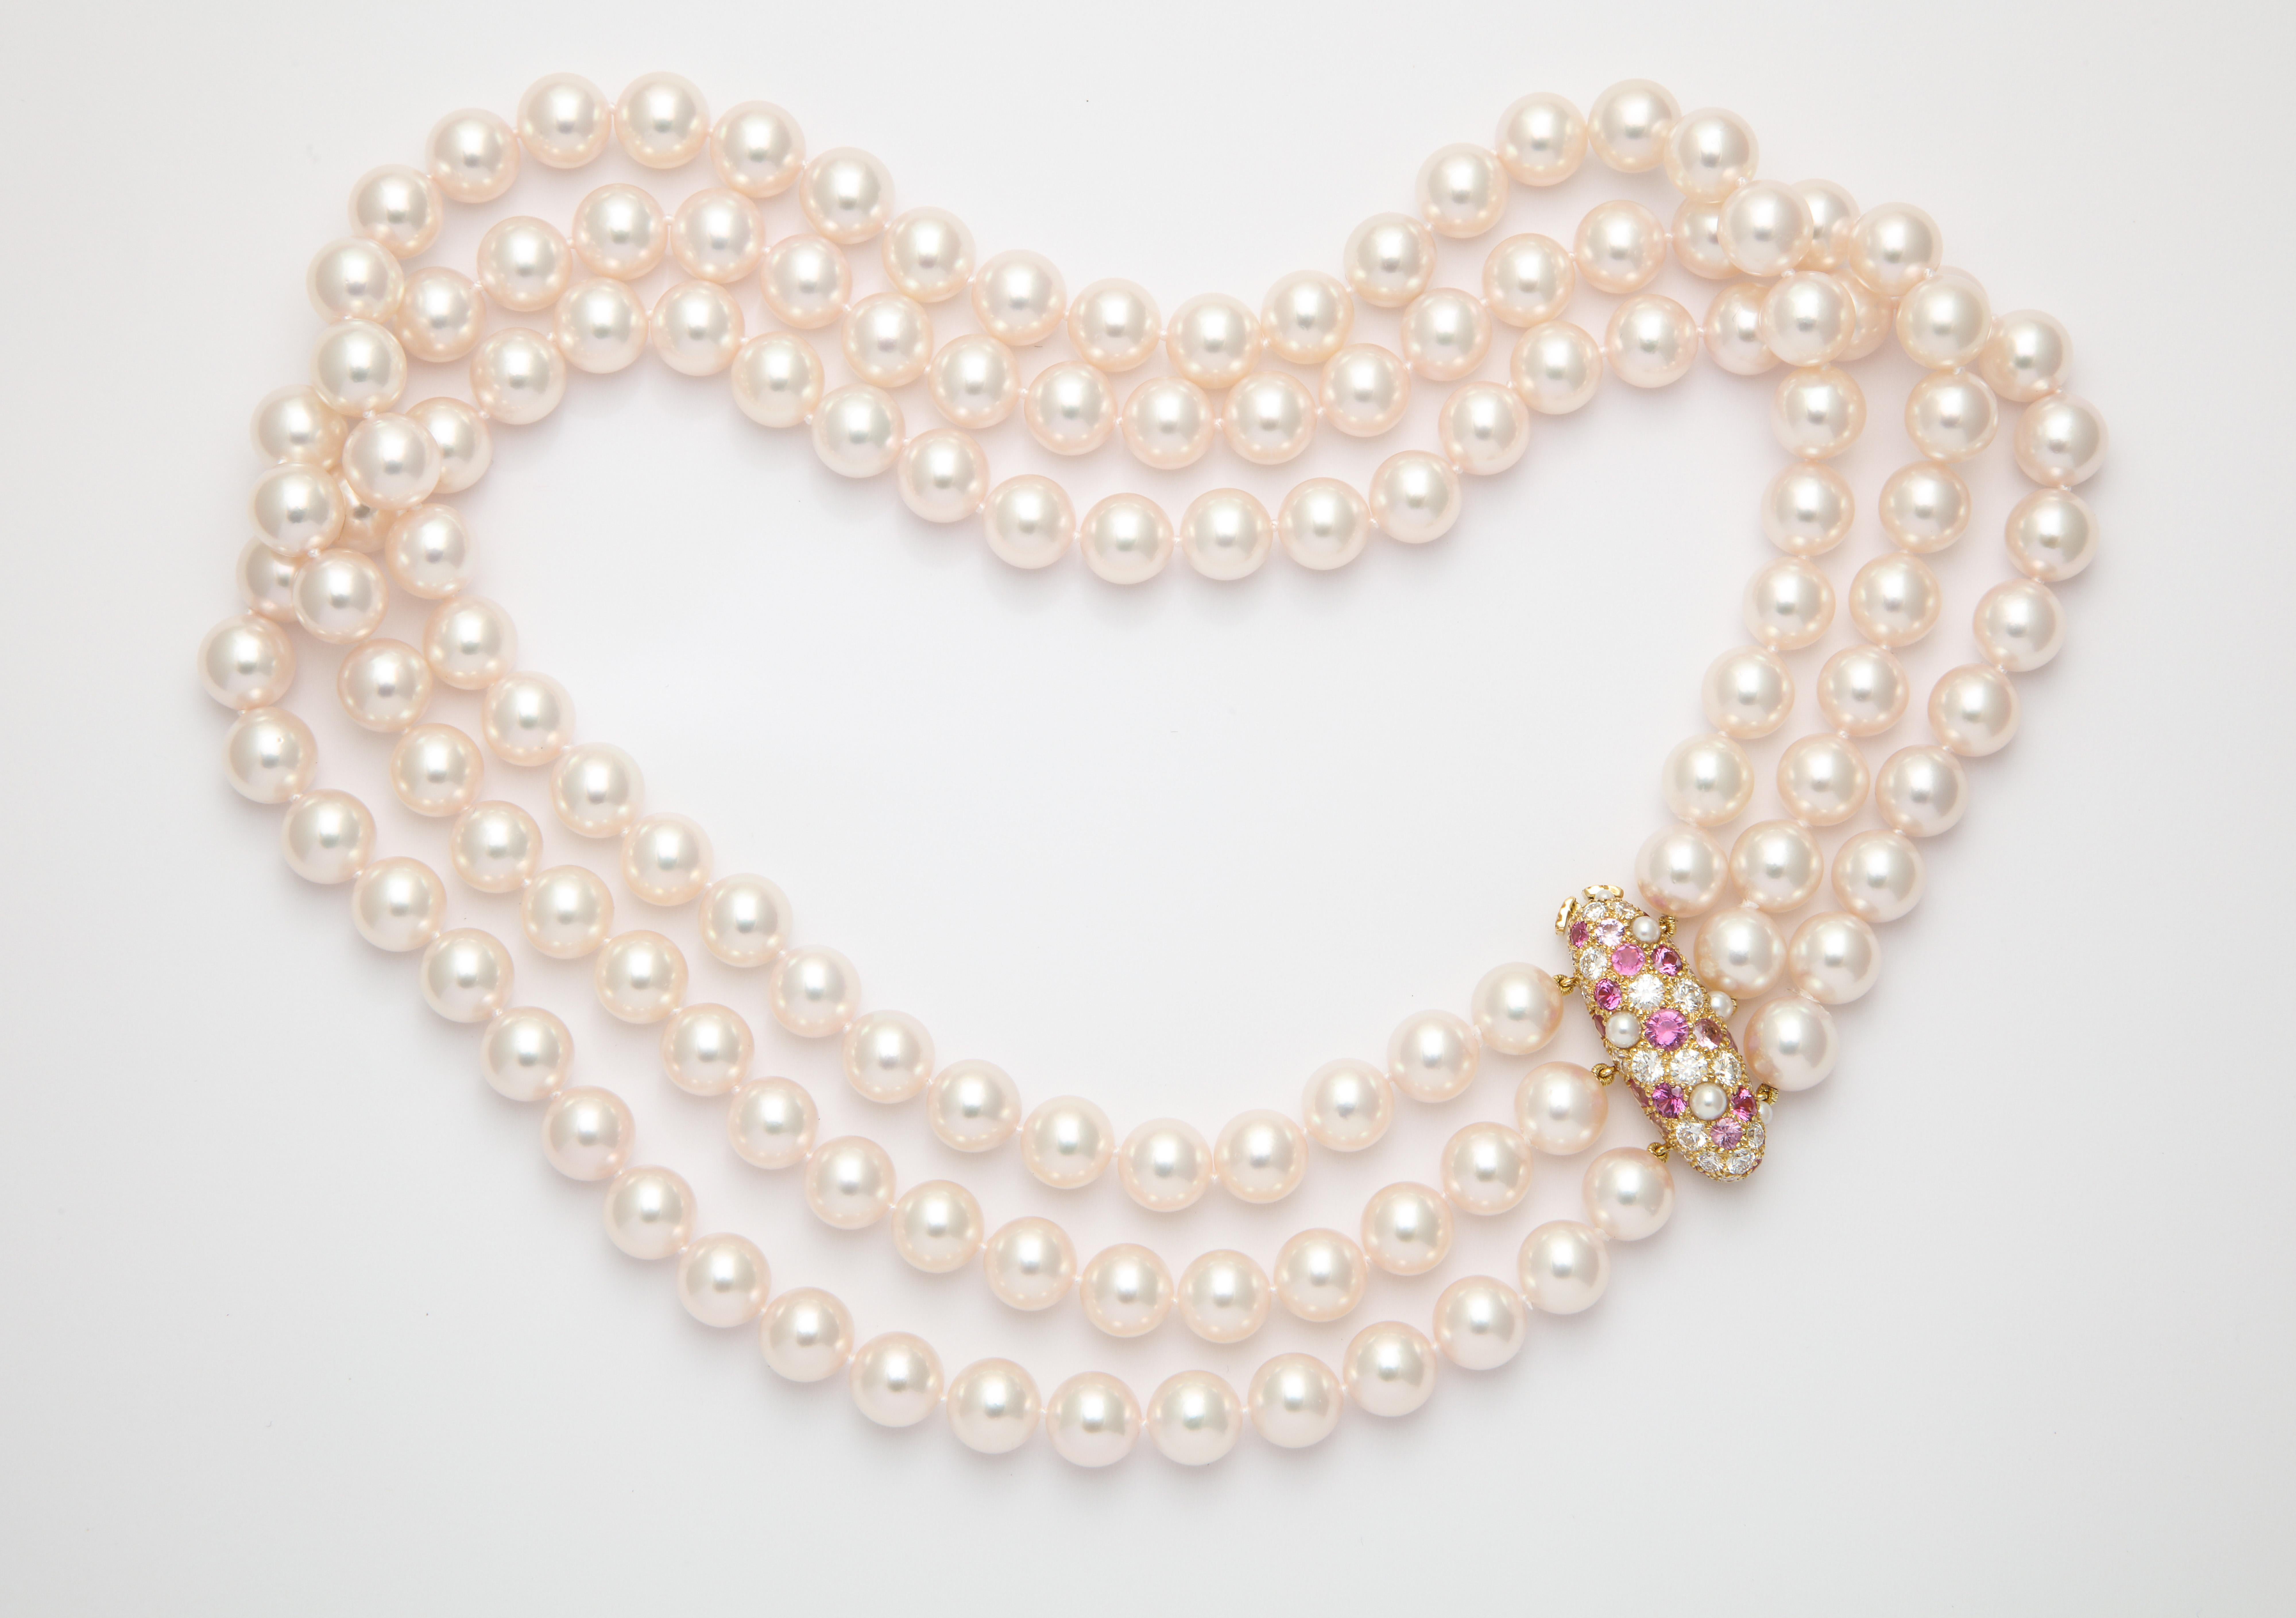 Round Cut Donna Vock Japanese Cultured Pearl Necklace with Pink Sapphire and Diamond Clasp For Sale